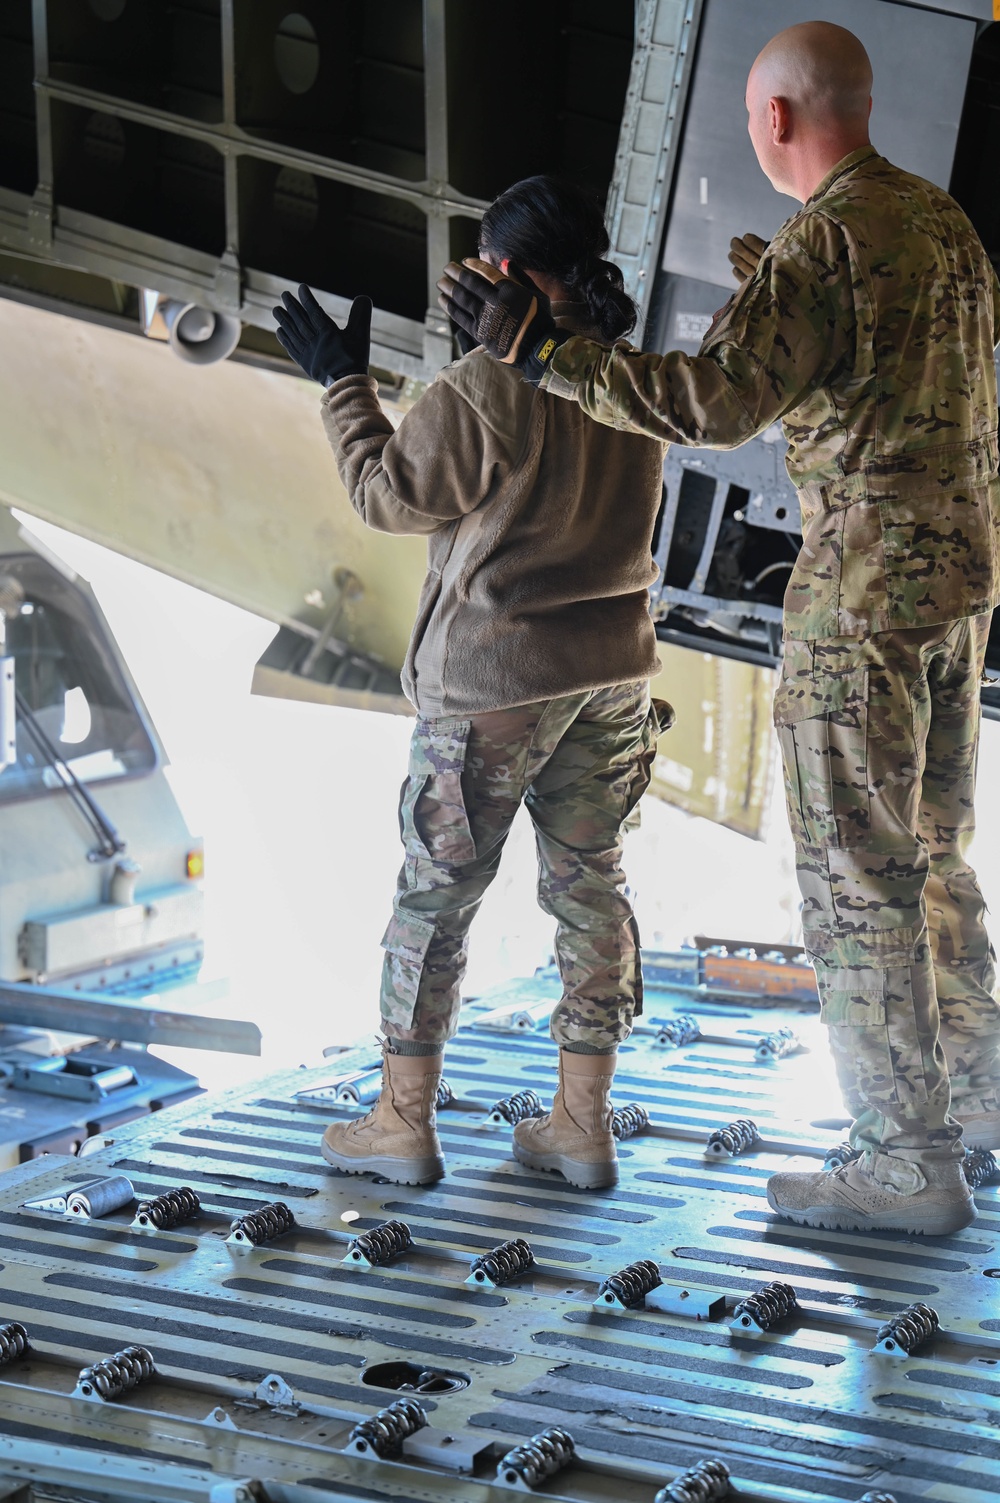 908th Airlift Wing jointly trains with 349th Air Mobility Wing